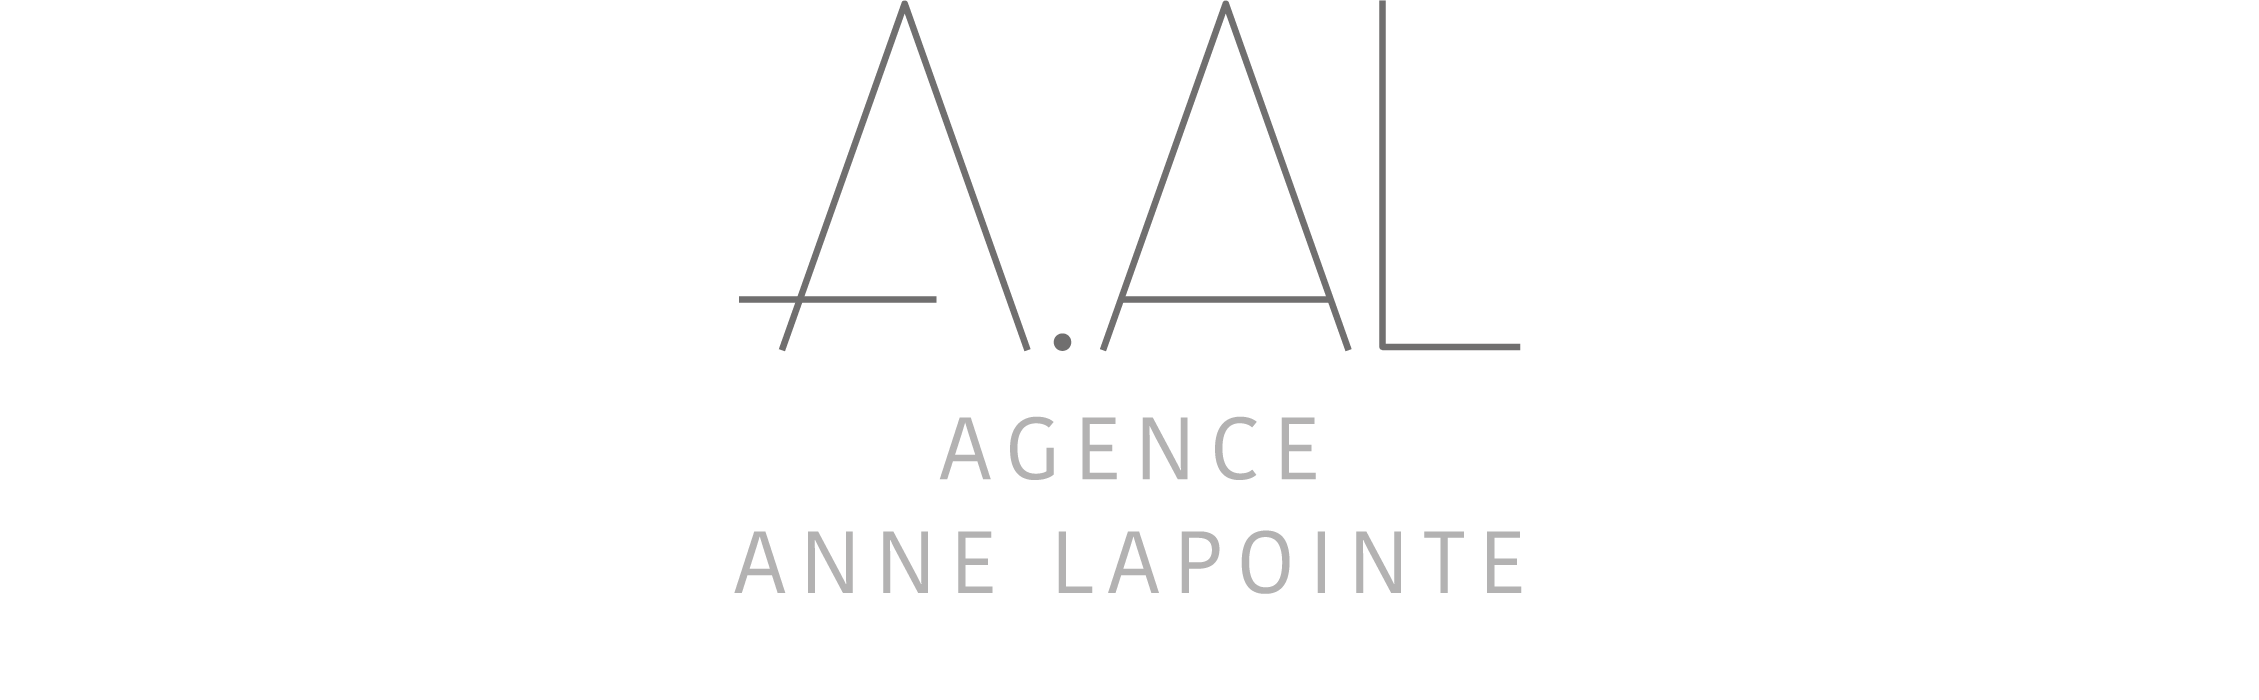 Agence Anne Lapointe logo